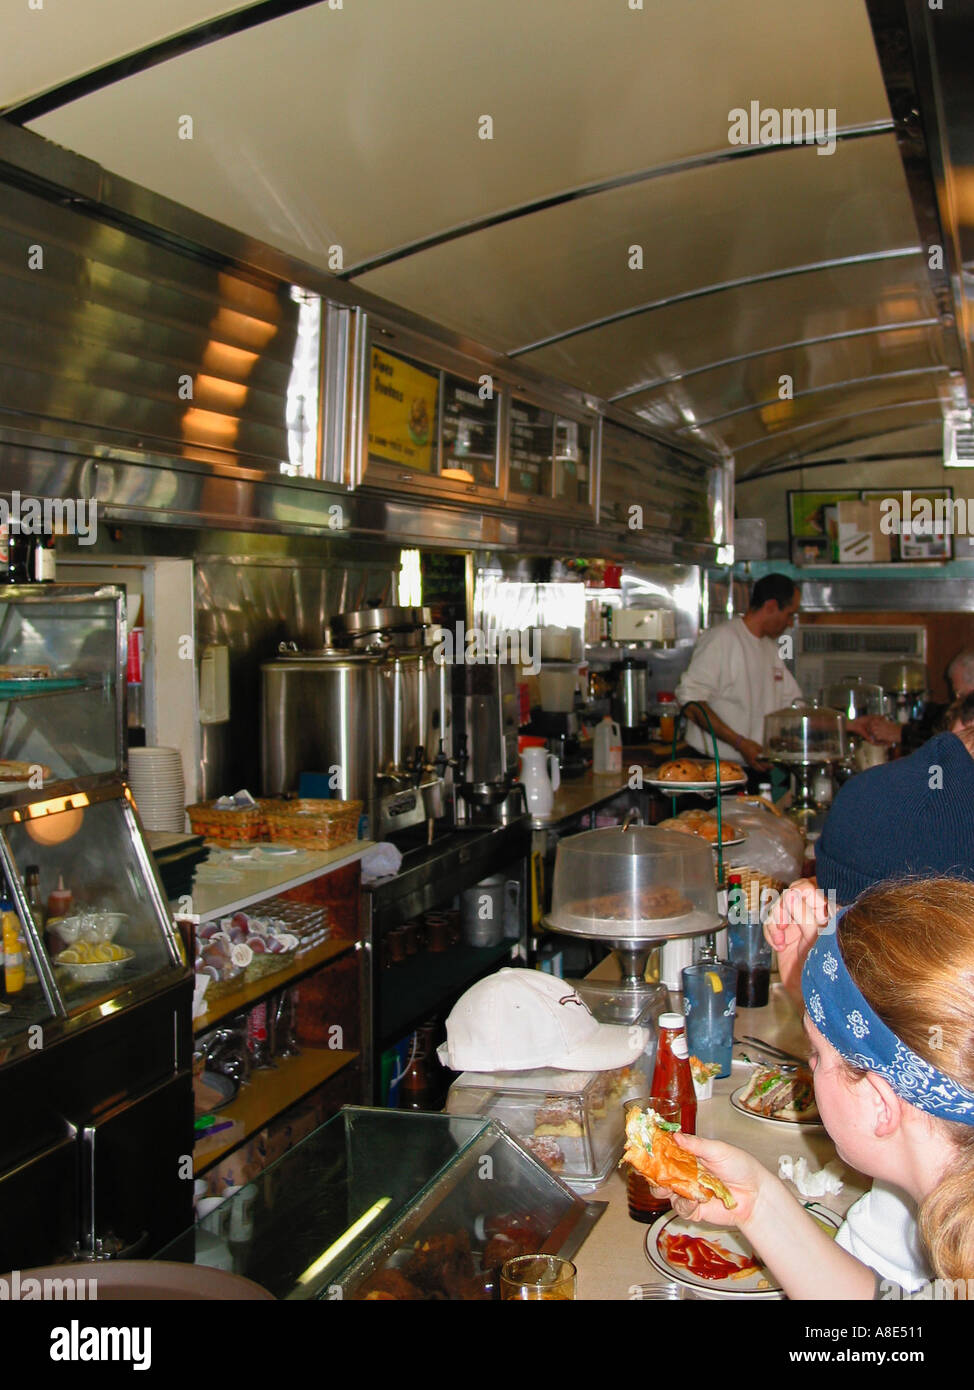 Typical Diner The Historic Village Diner Town of Red Hook Dutchess County New York State USA Stock Photo